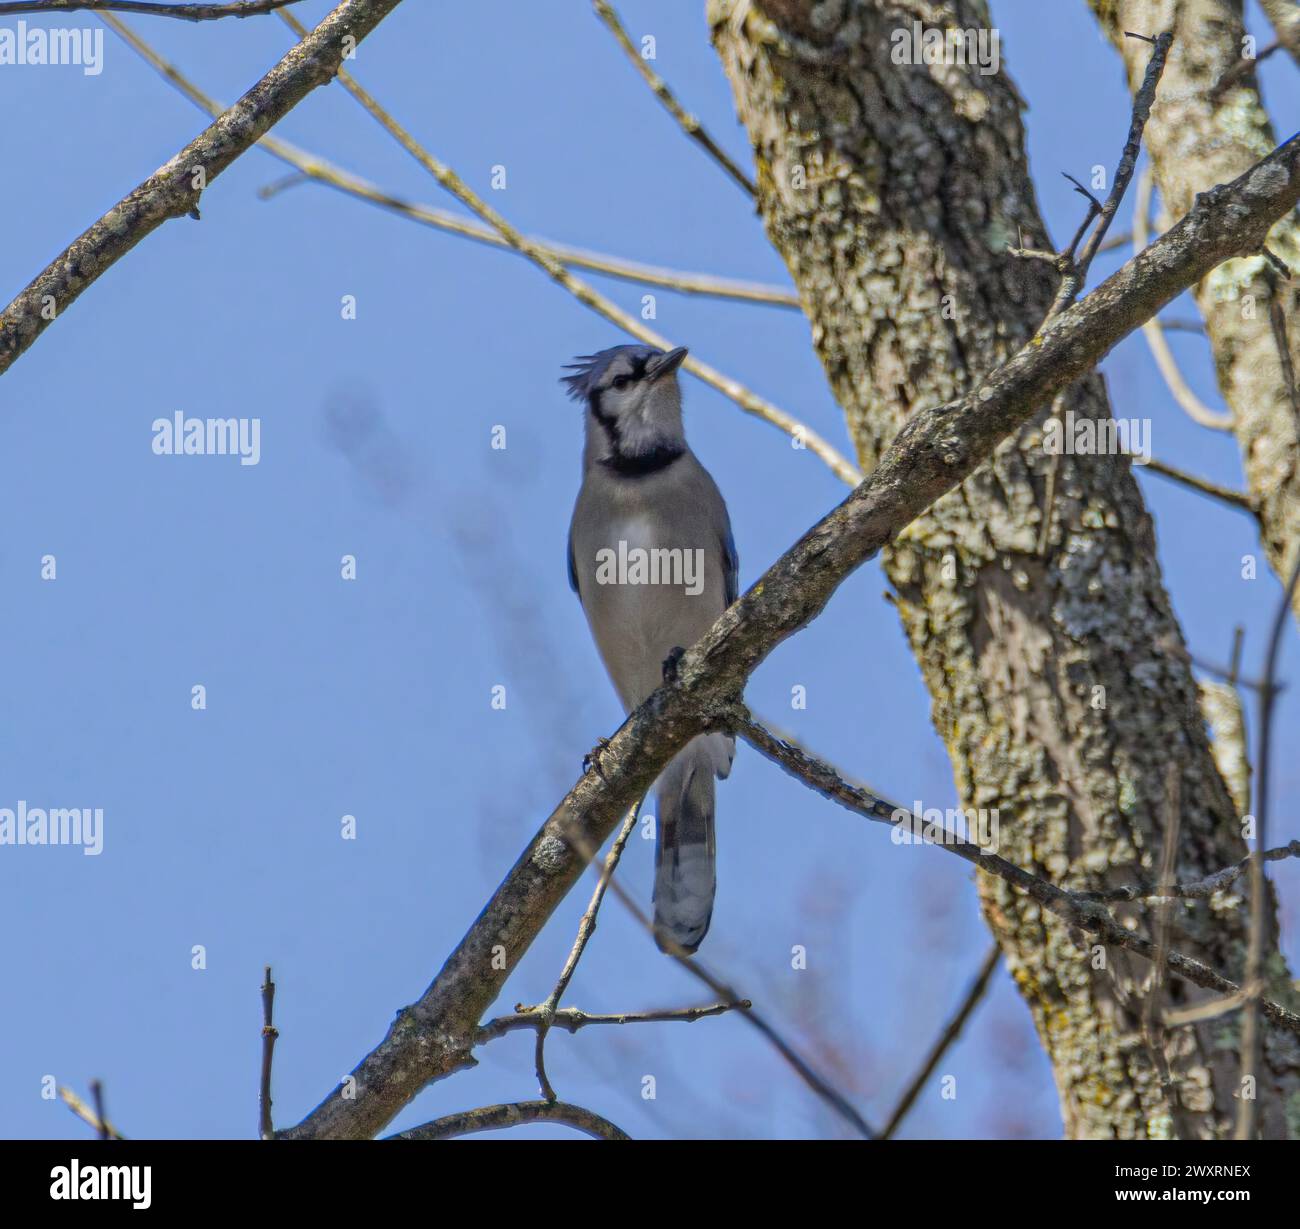 A blue jay perched on a tree limb during the day. Stock Photo